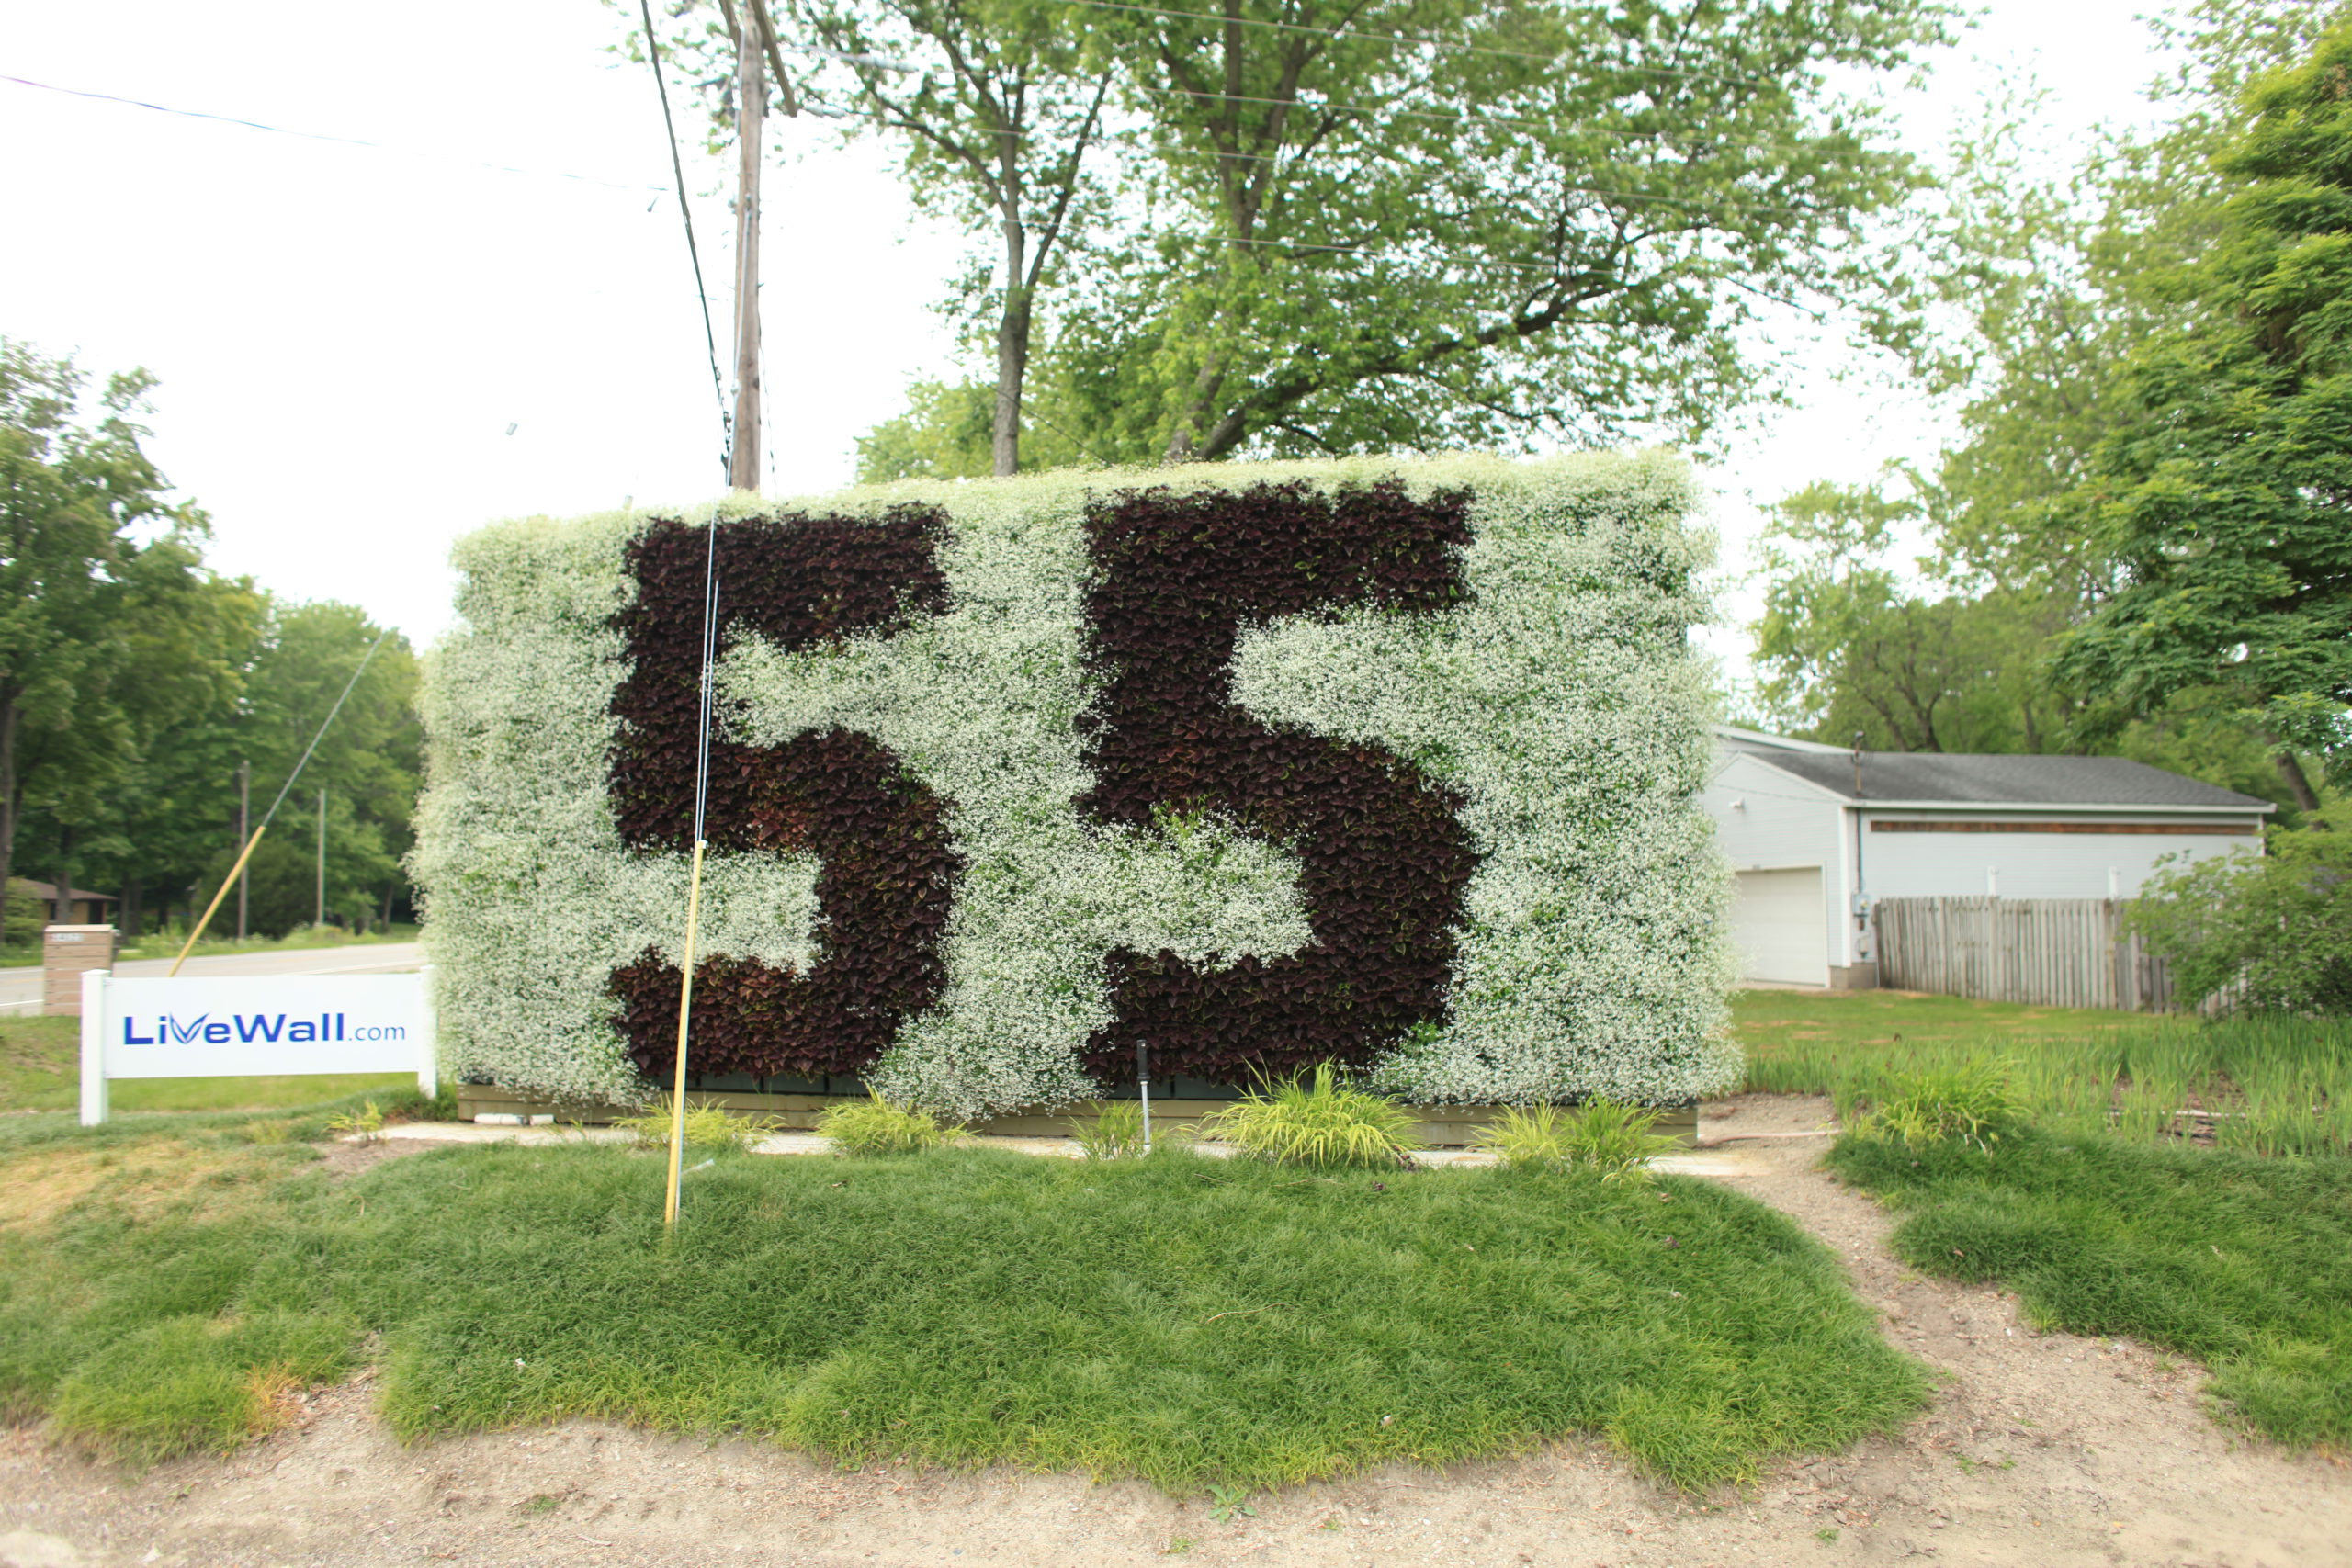 The speed limit of a road represented in a living wall